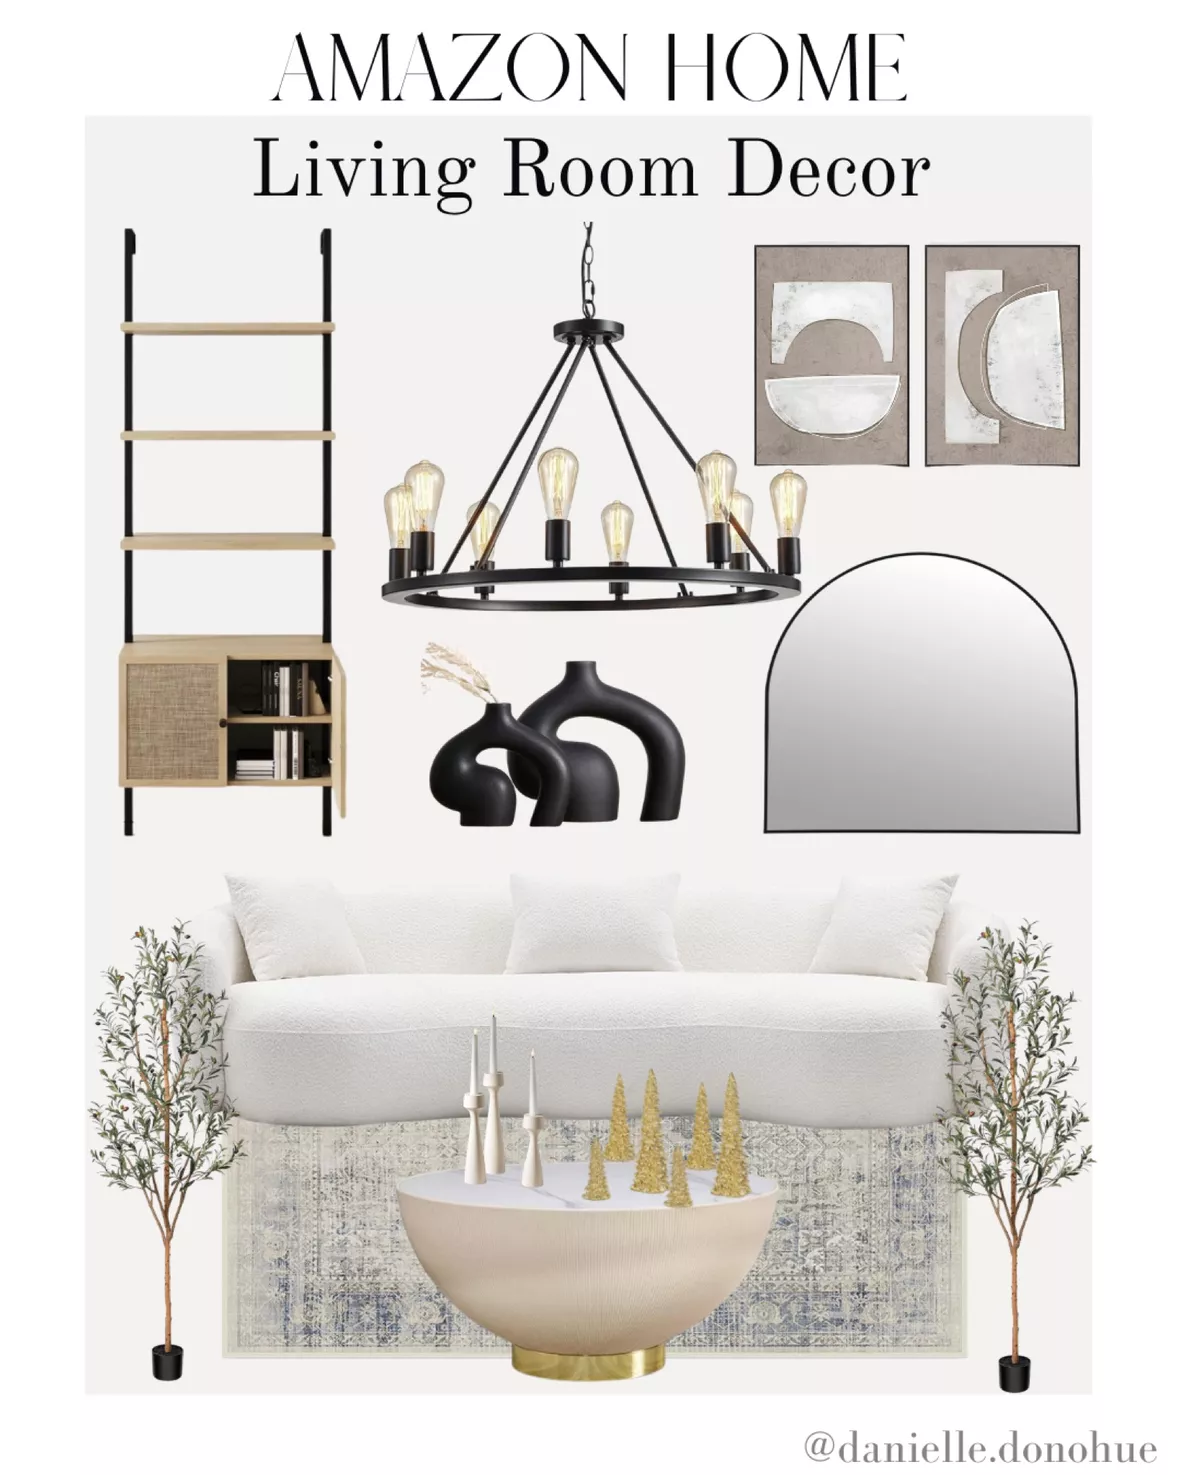 𝐃𝐚𝐧𝐢𝐞𝐥𝐥𝐞 𝐃𝐨𝐧𝐨𝐡𝐮𝐞 •  HOME FINDS • Lifestyle on